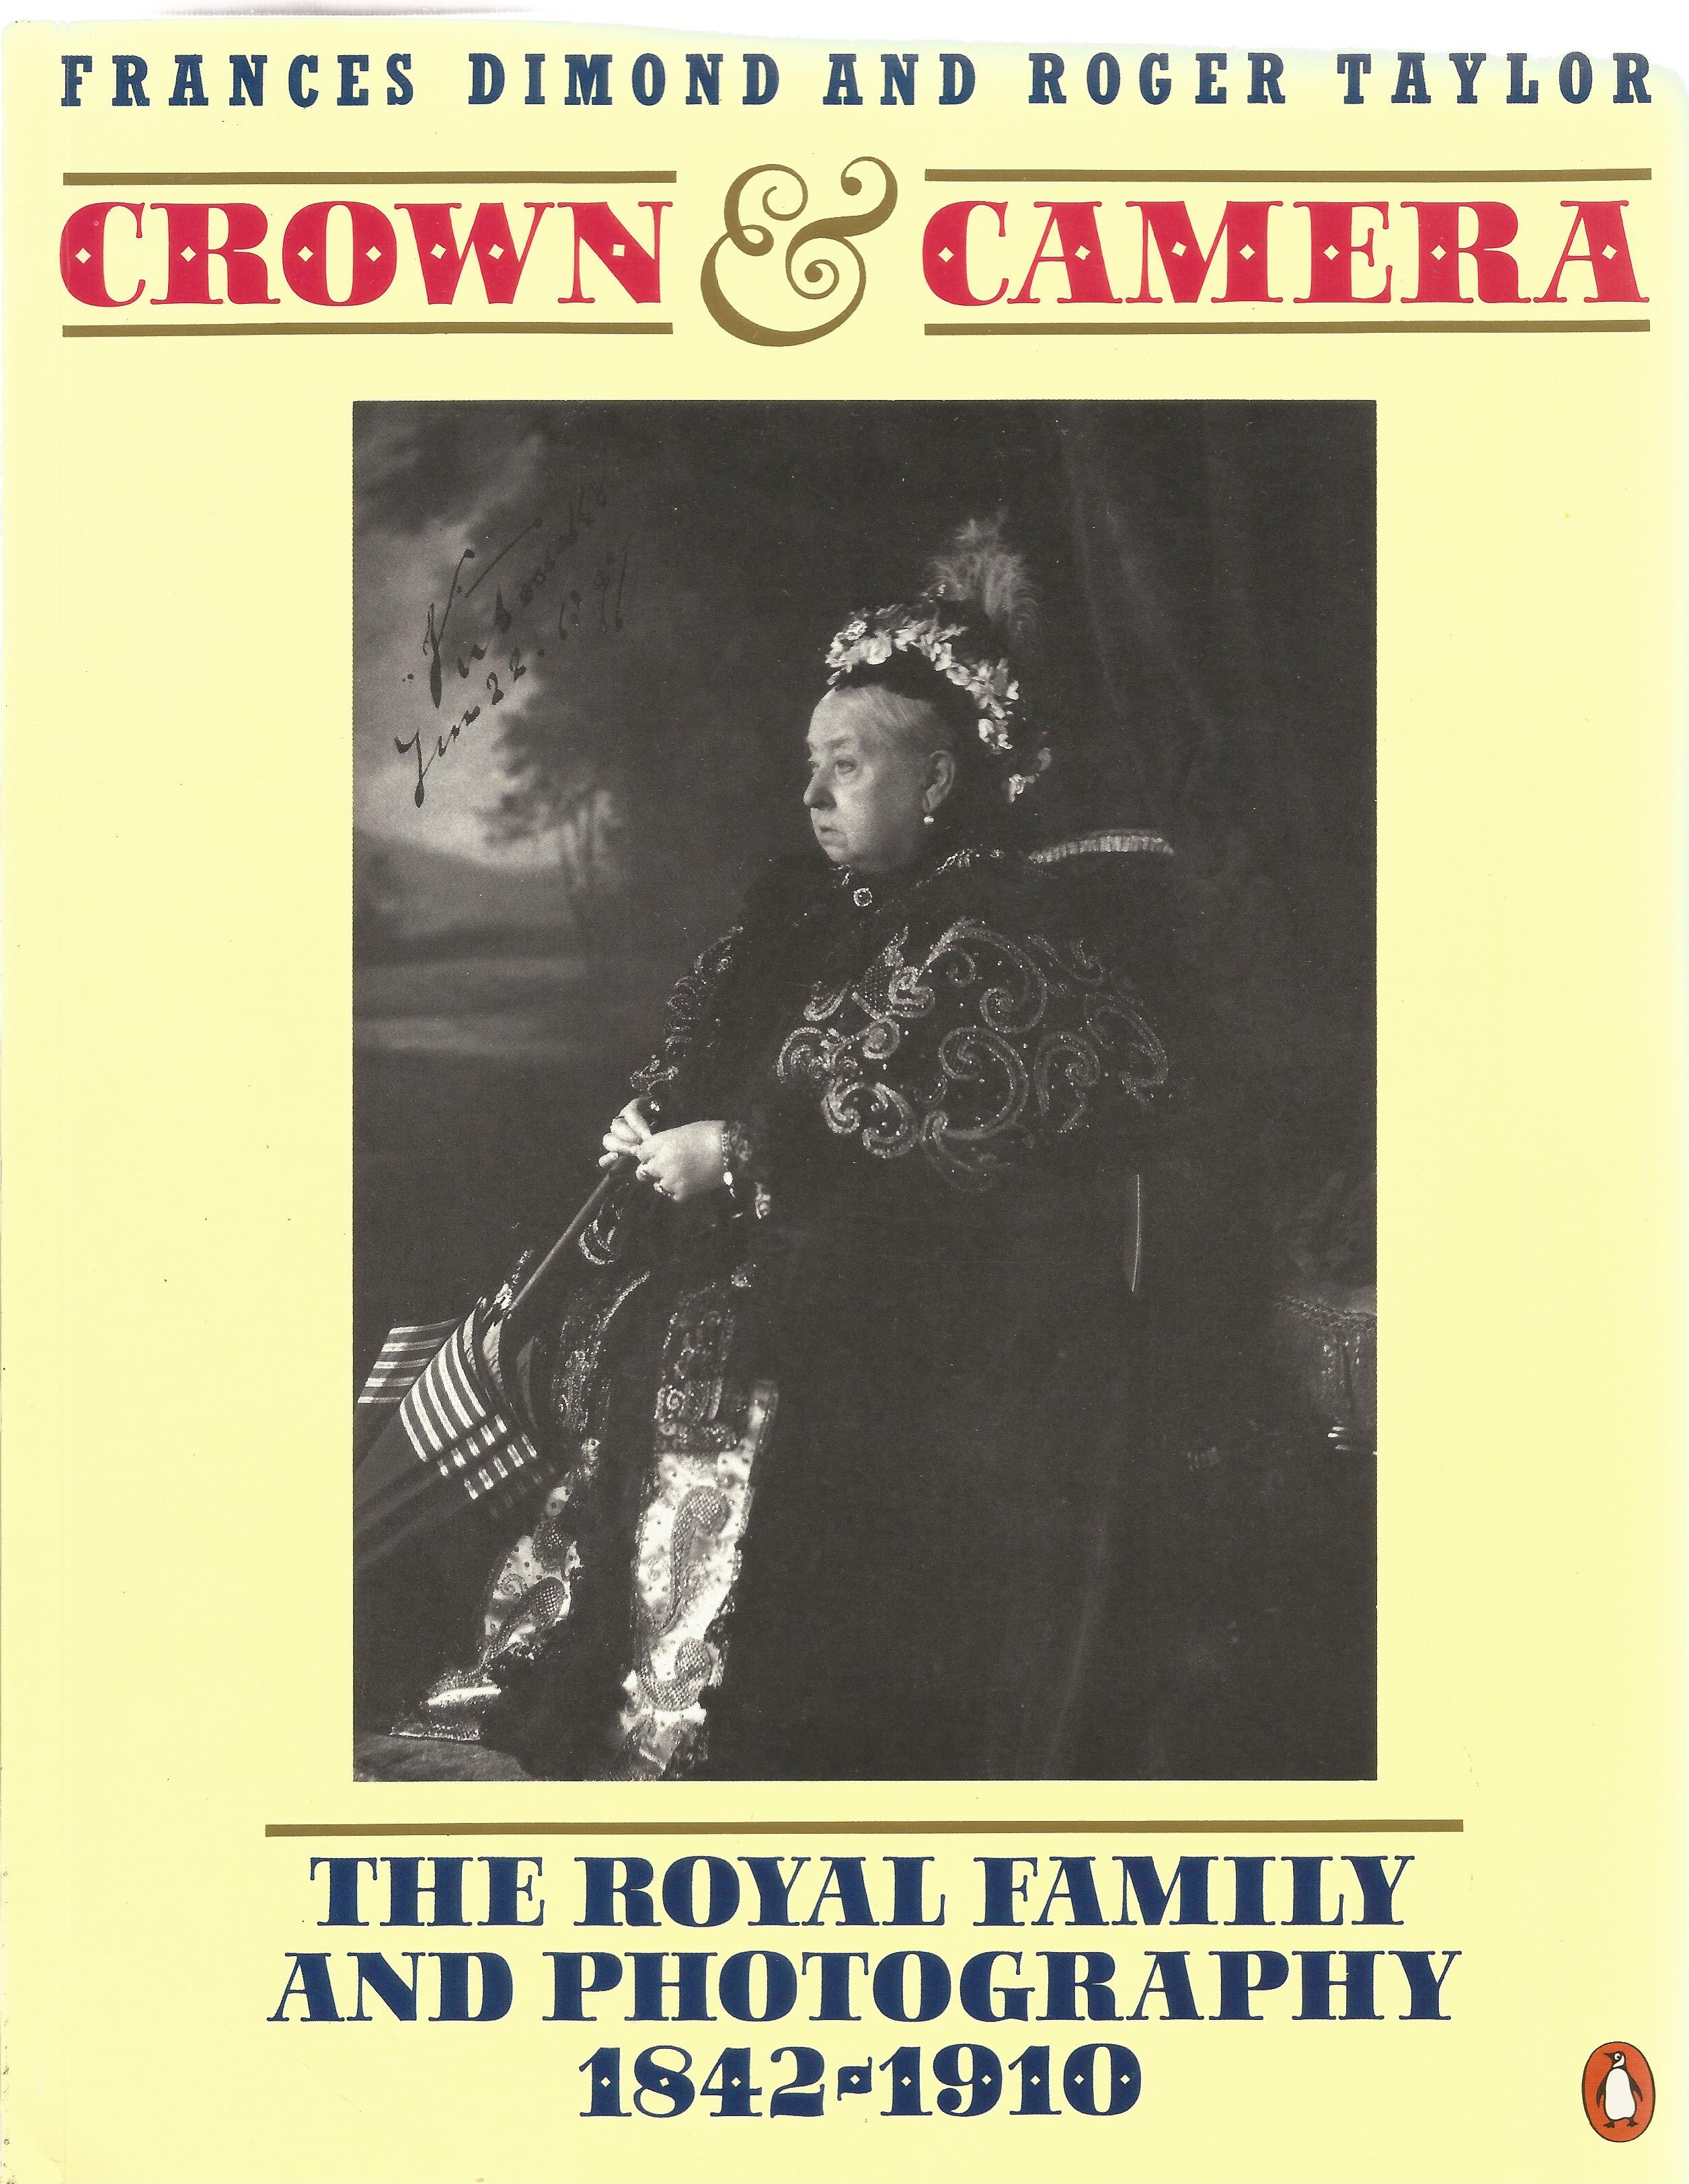 Frances Dimond and Roger Taylor softback book Crown & Camera - The Royal Family and Photography